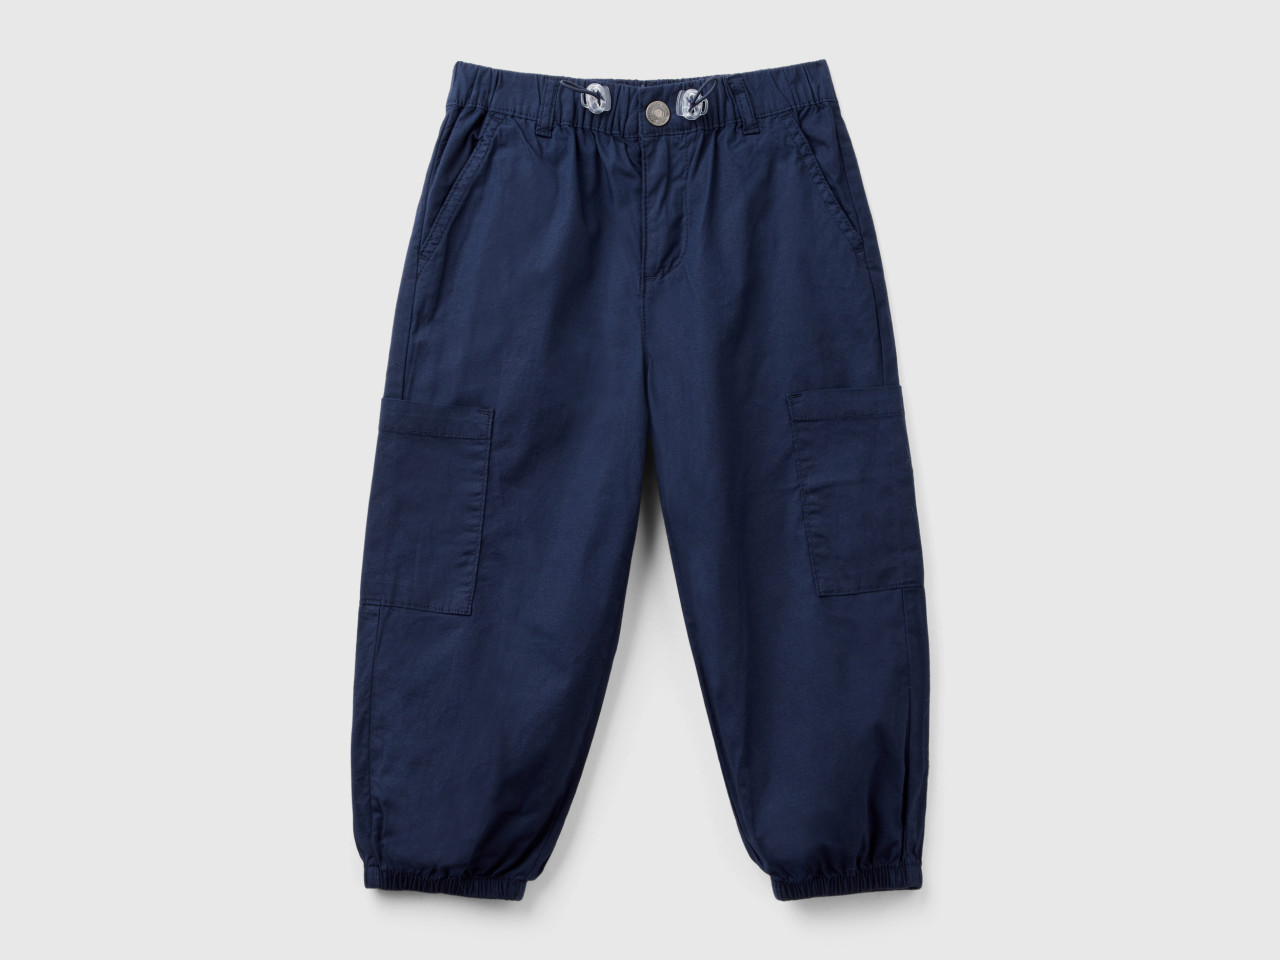 Boys Childrens Combat Cargo Trousers Bottoms Pants Navy Pockets 3 4 5 6 7 8  9 Y | eBay